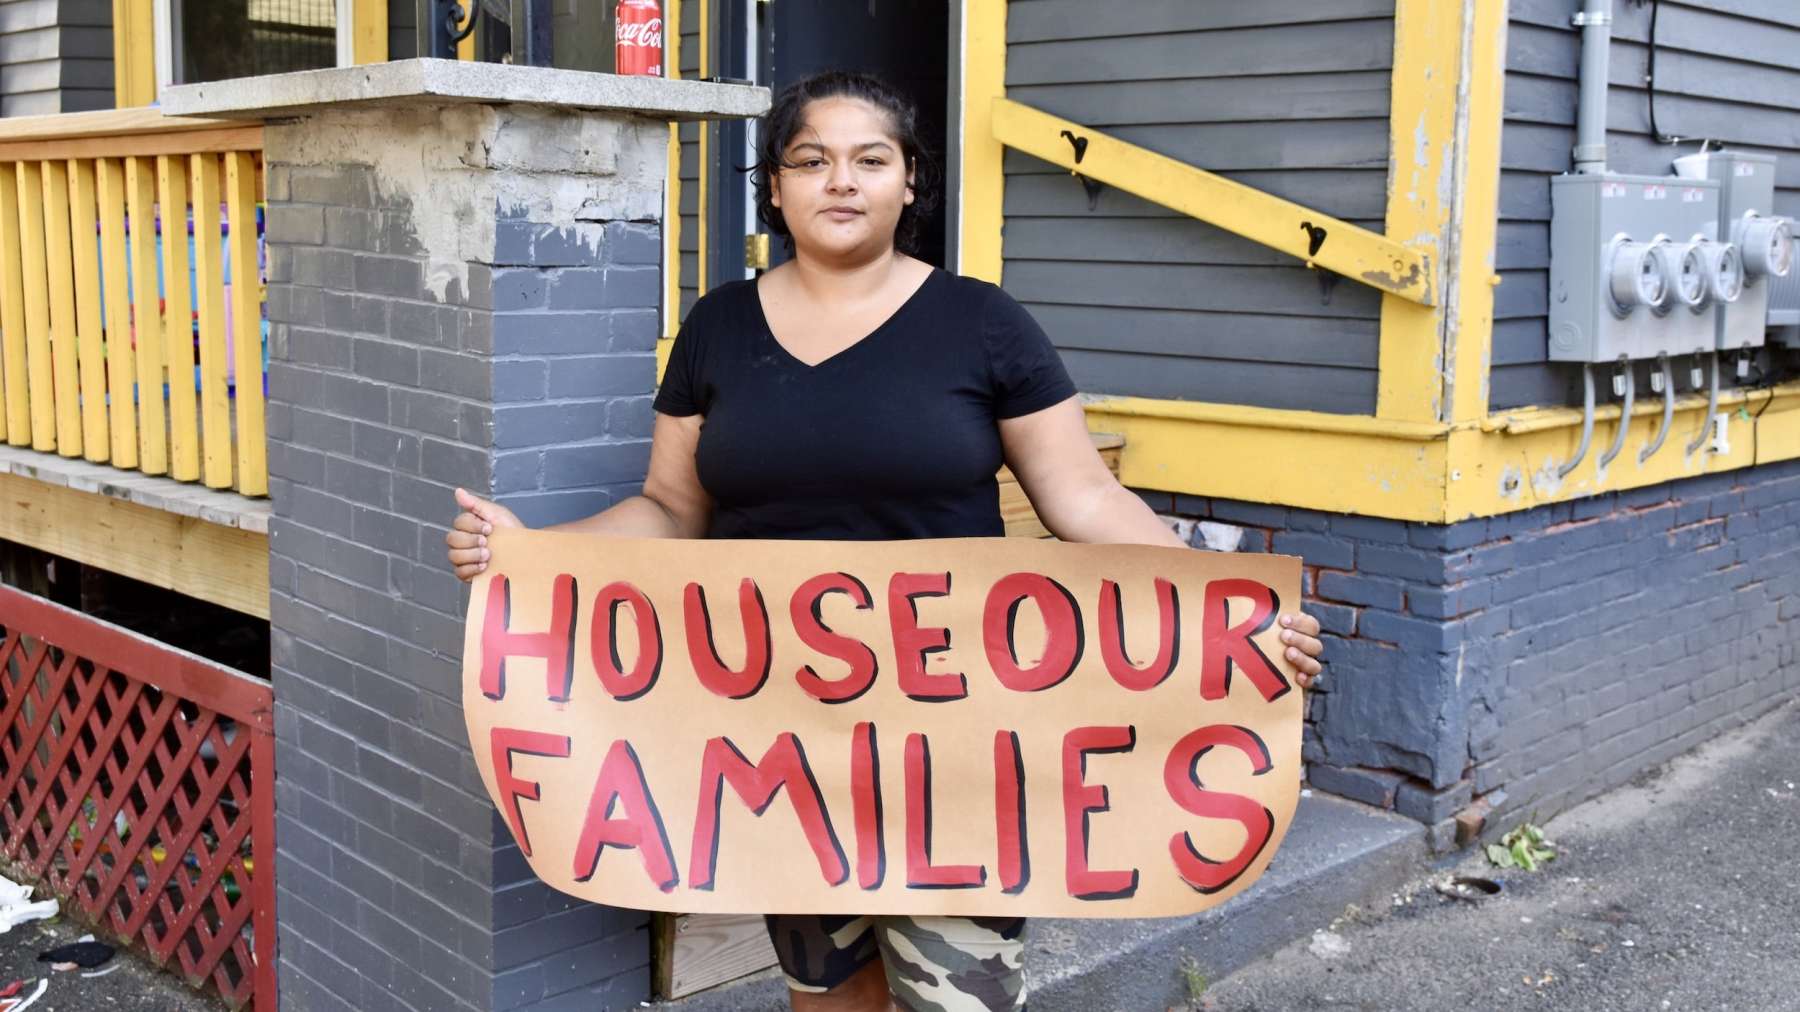 Rhode Island News: As eviction moratorium ends, renters begin to call out landlords